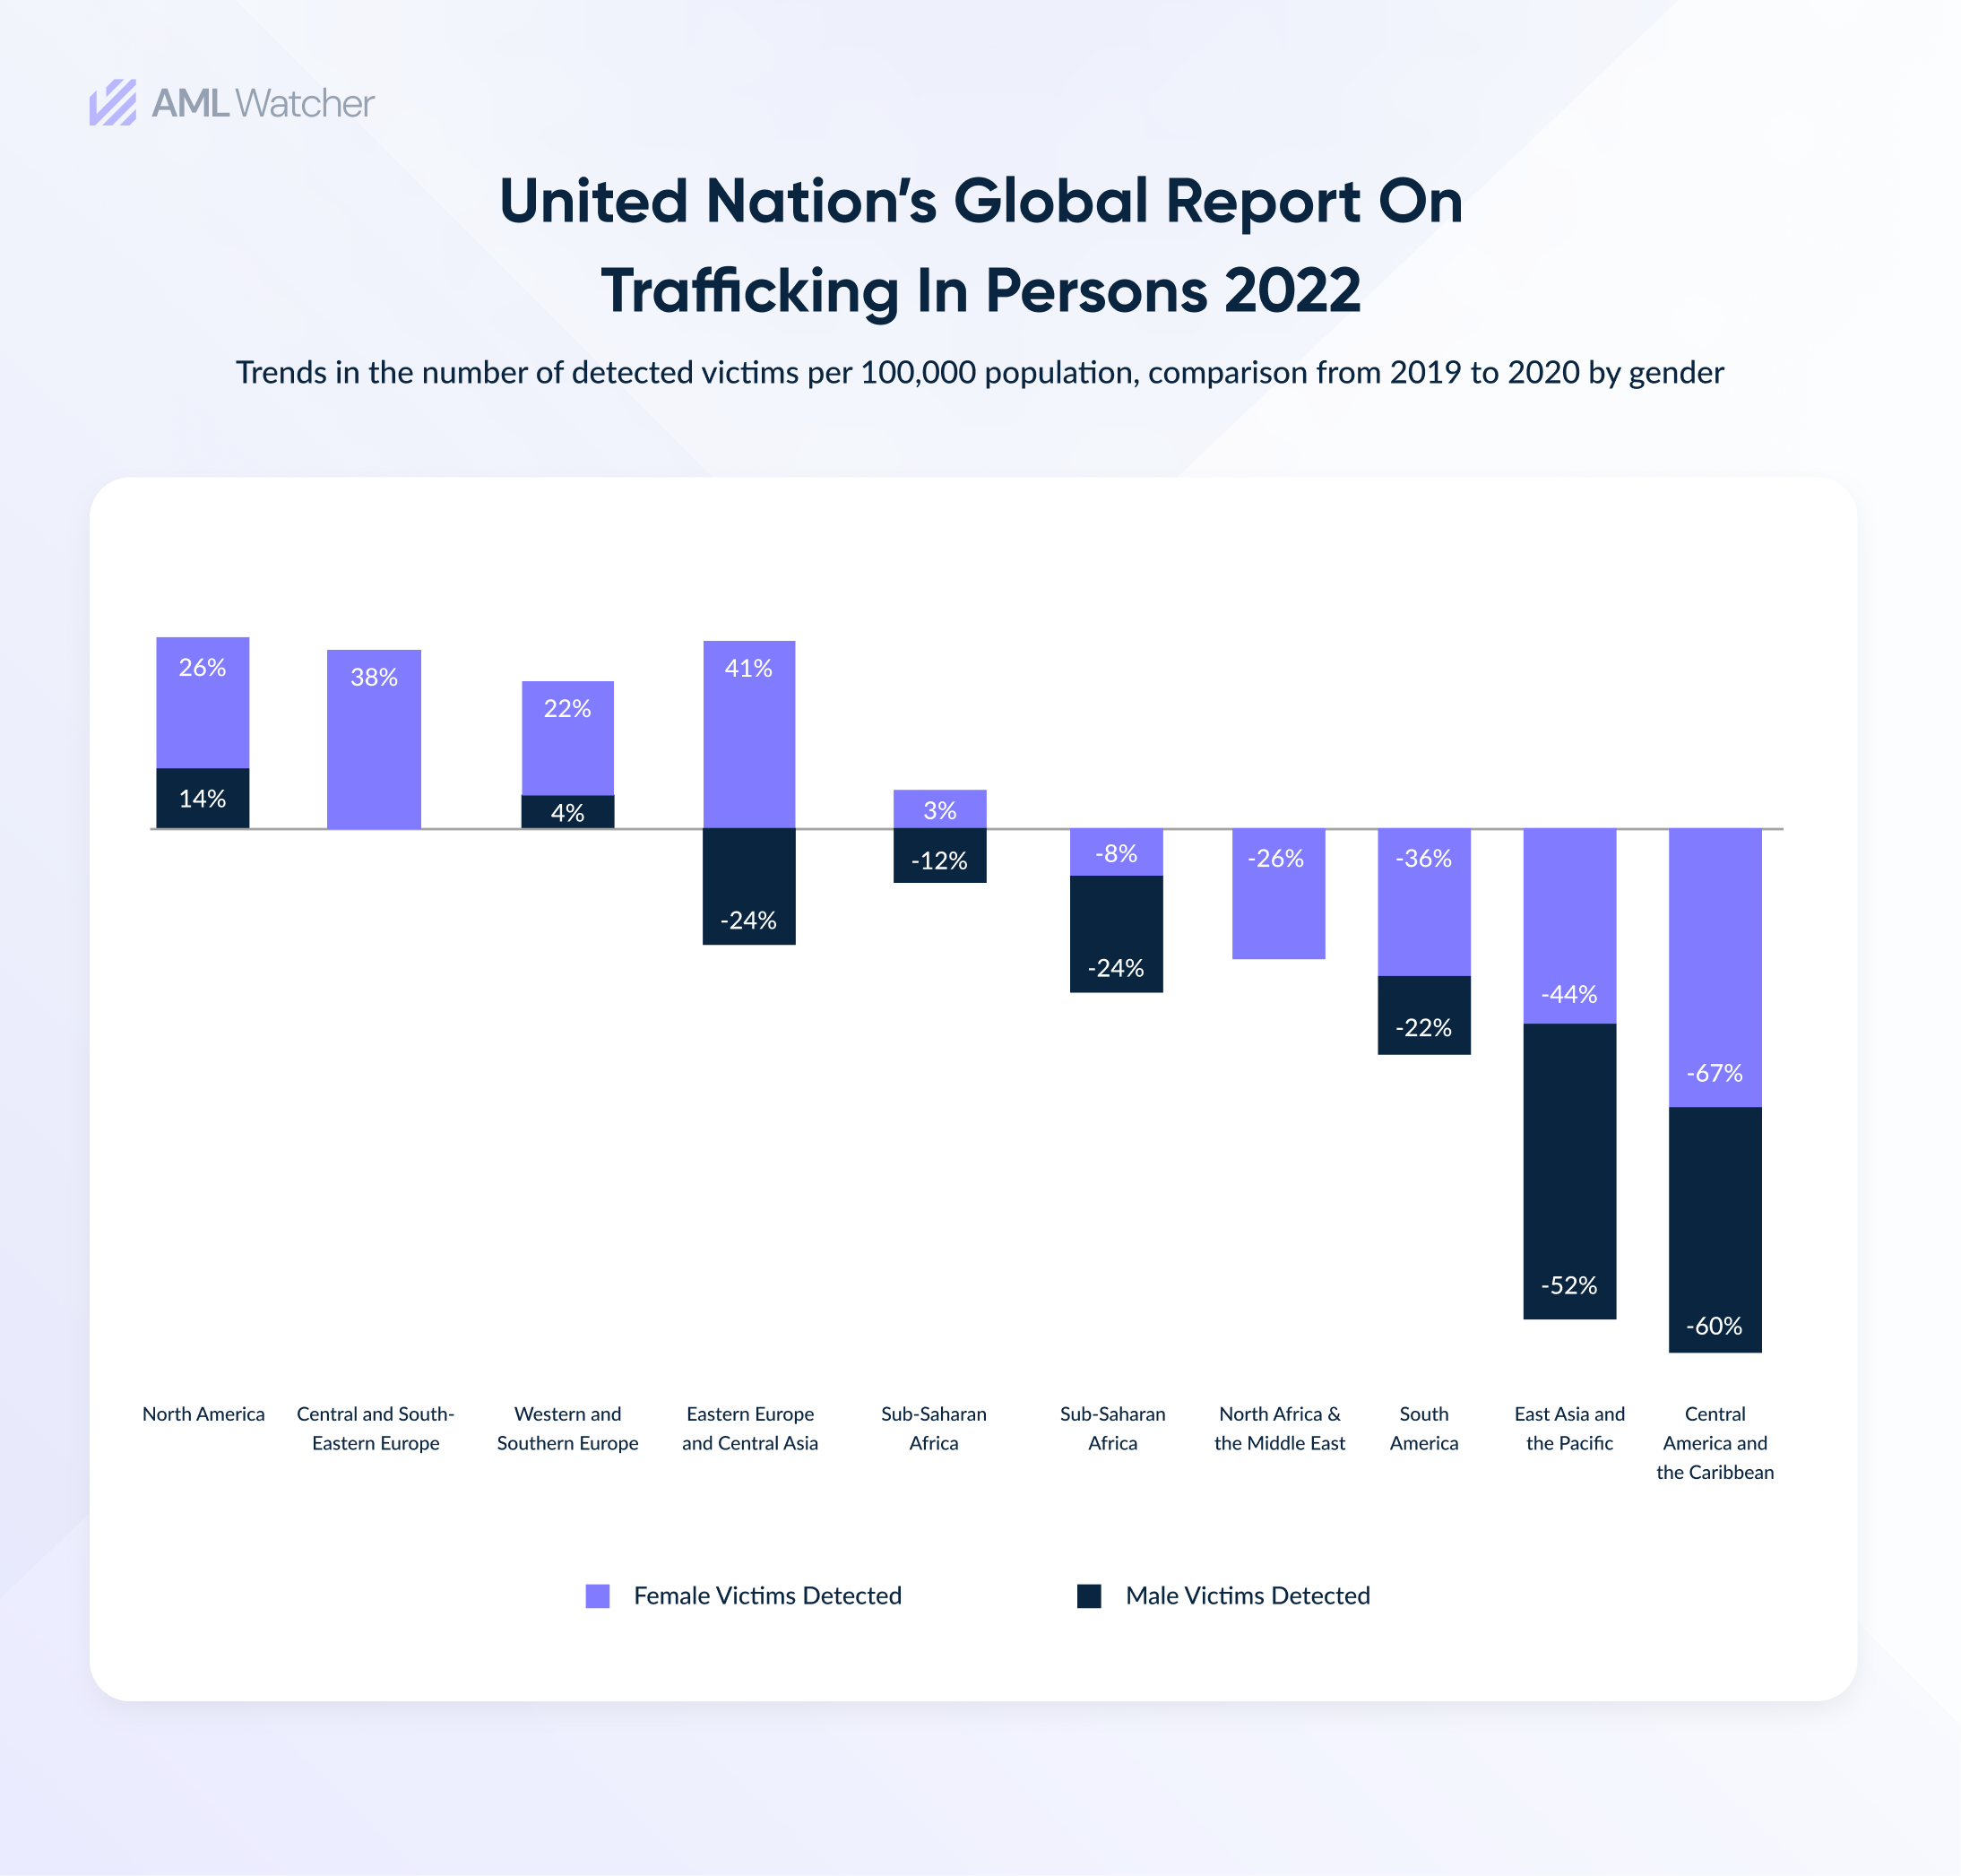 This image shows the United Nations Global Report on Trafficking in Persons 2022